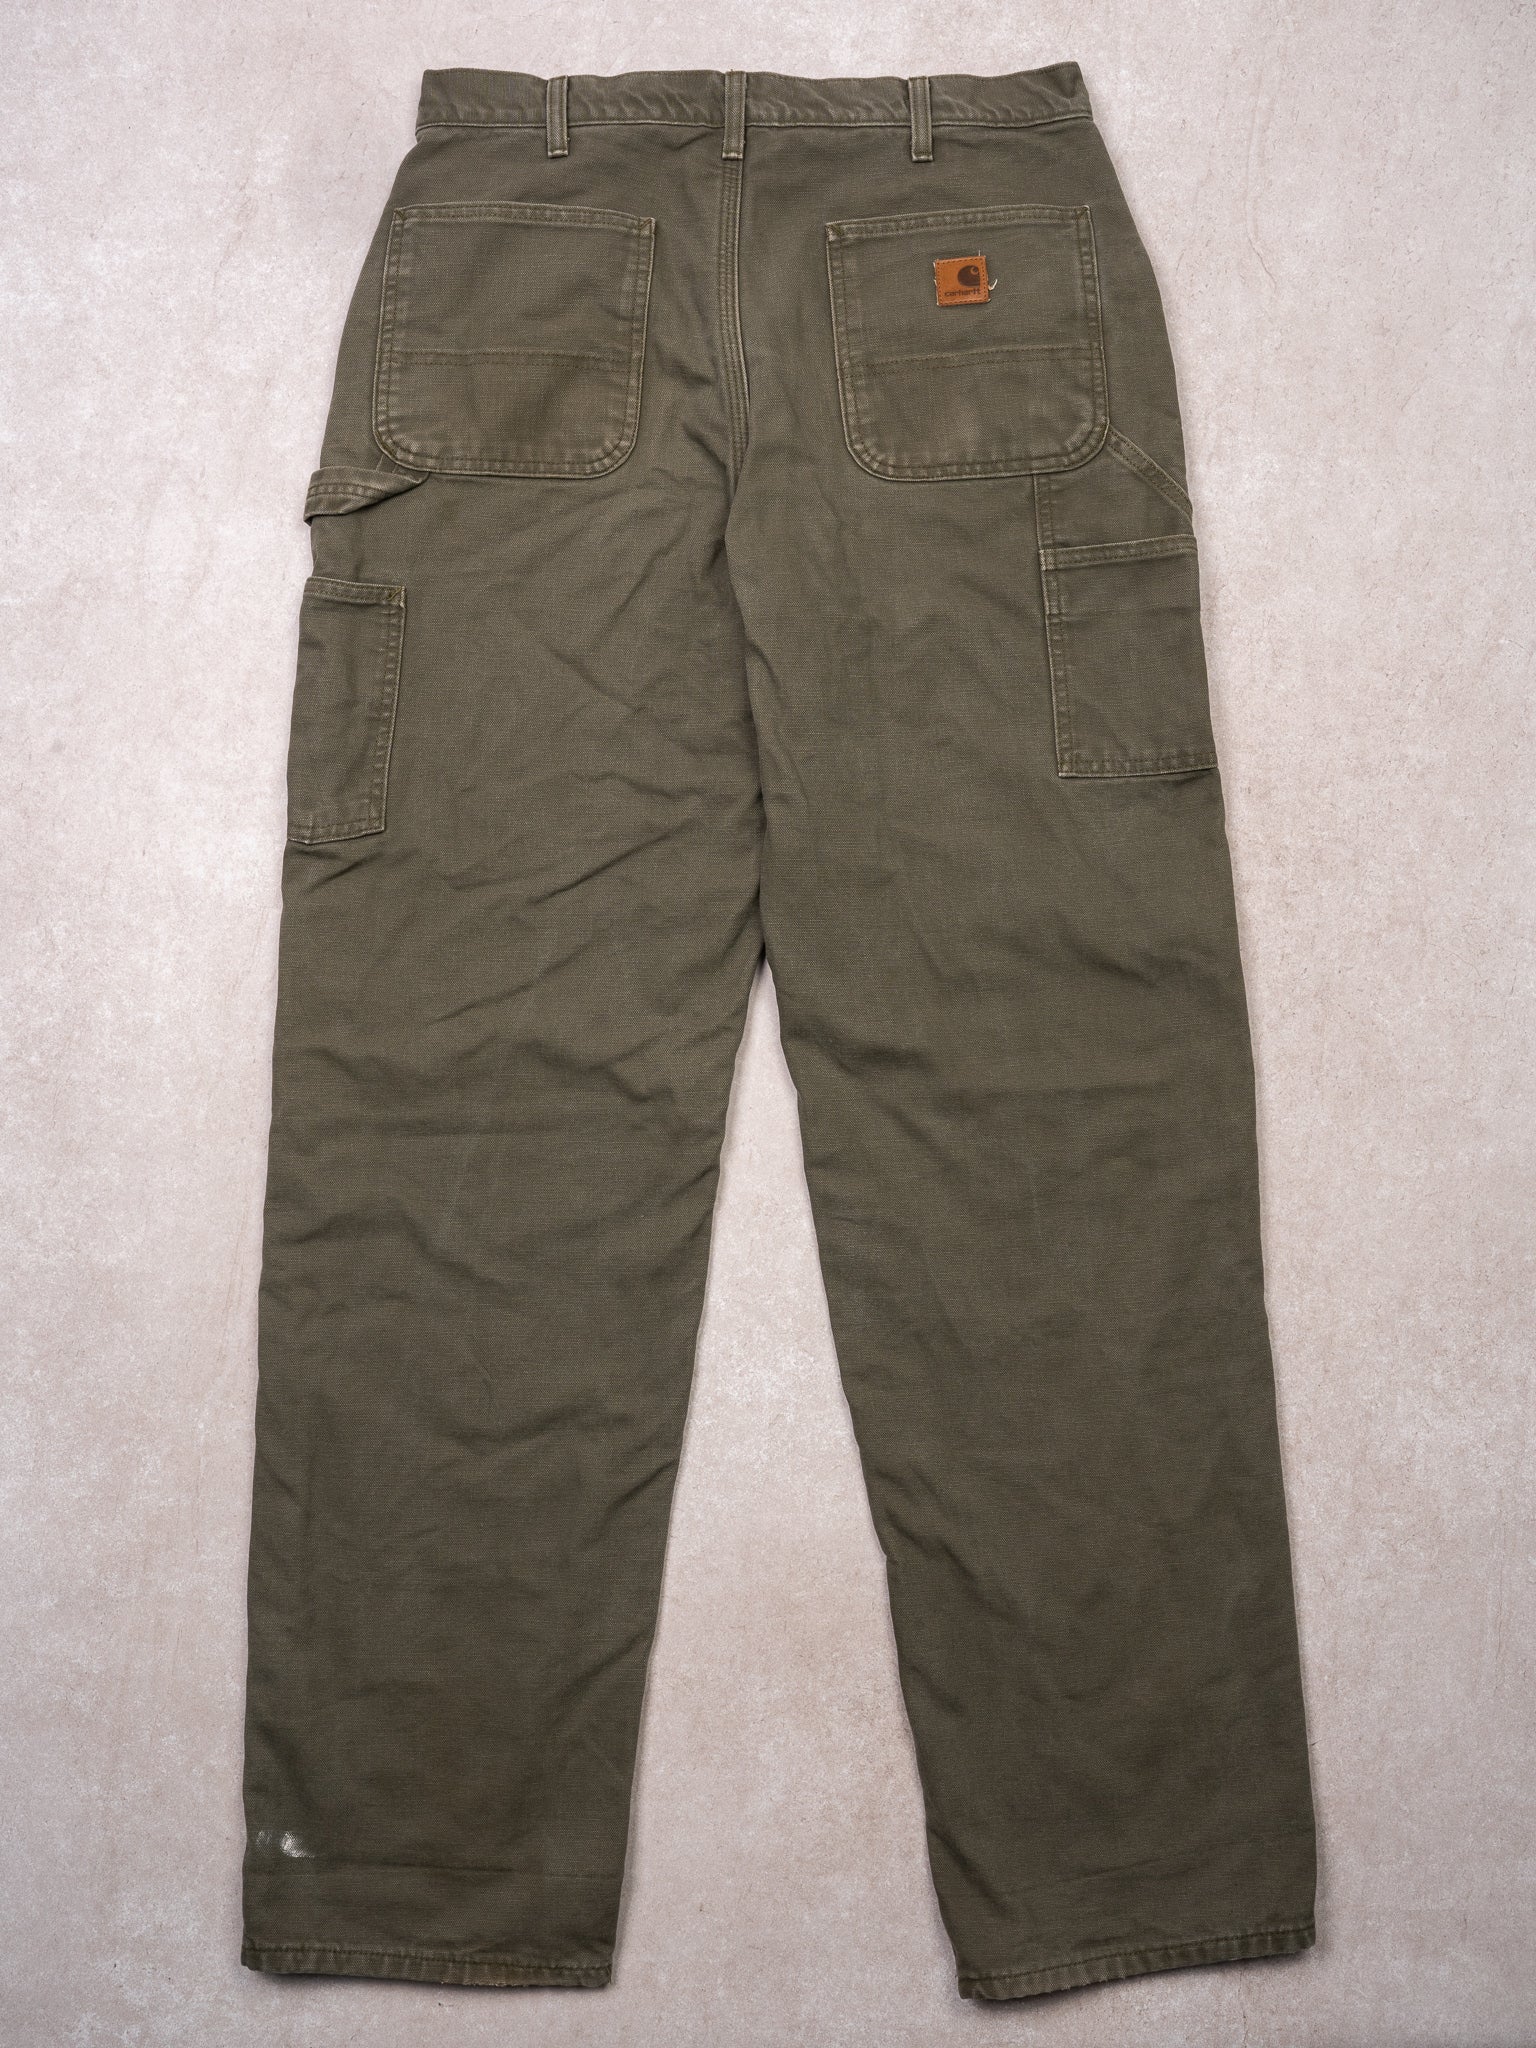 Vintage Olive Green Carhartt Dungaree Fit Cargo Pants (34 x 34)